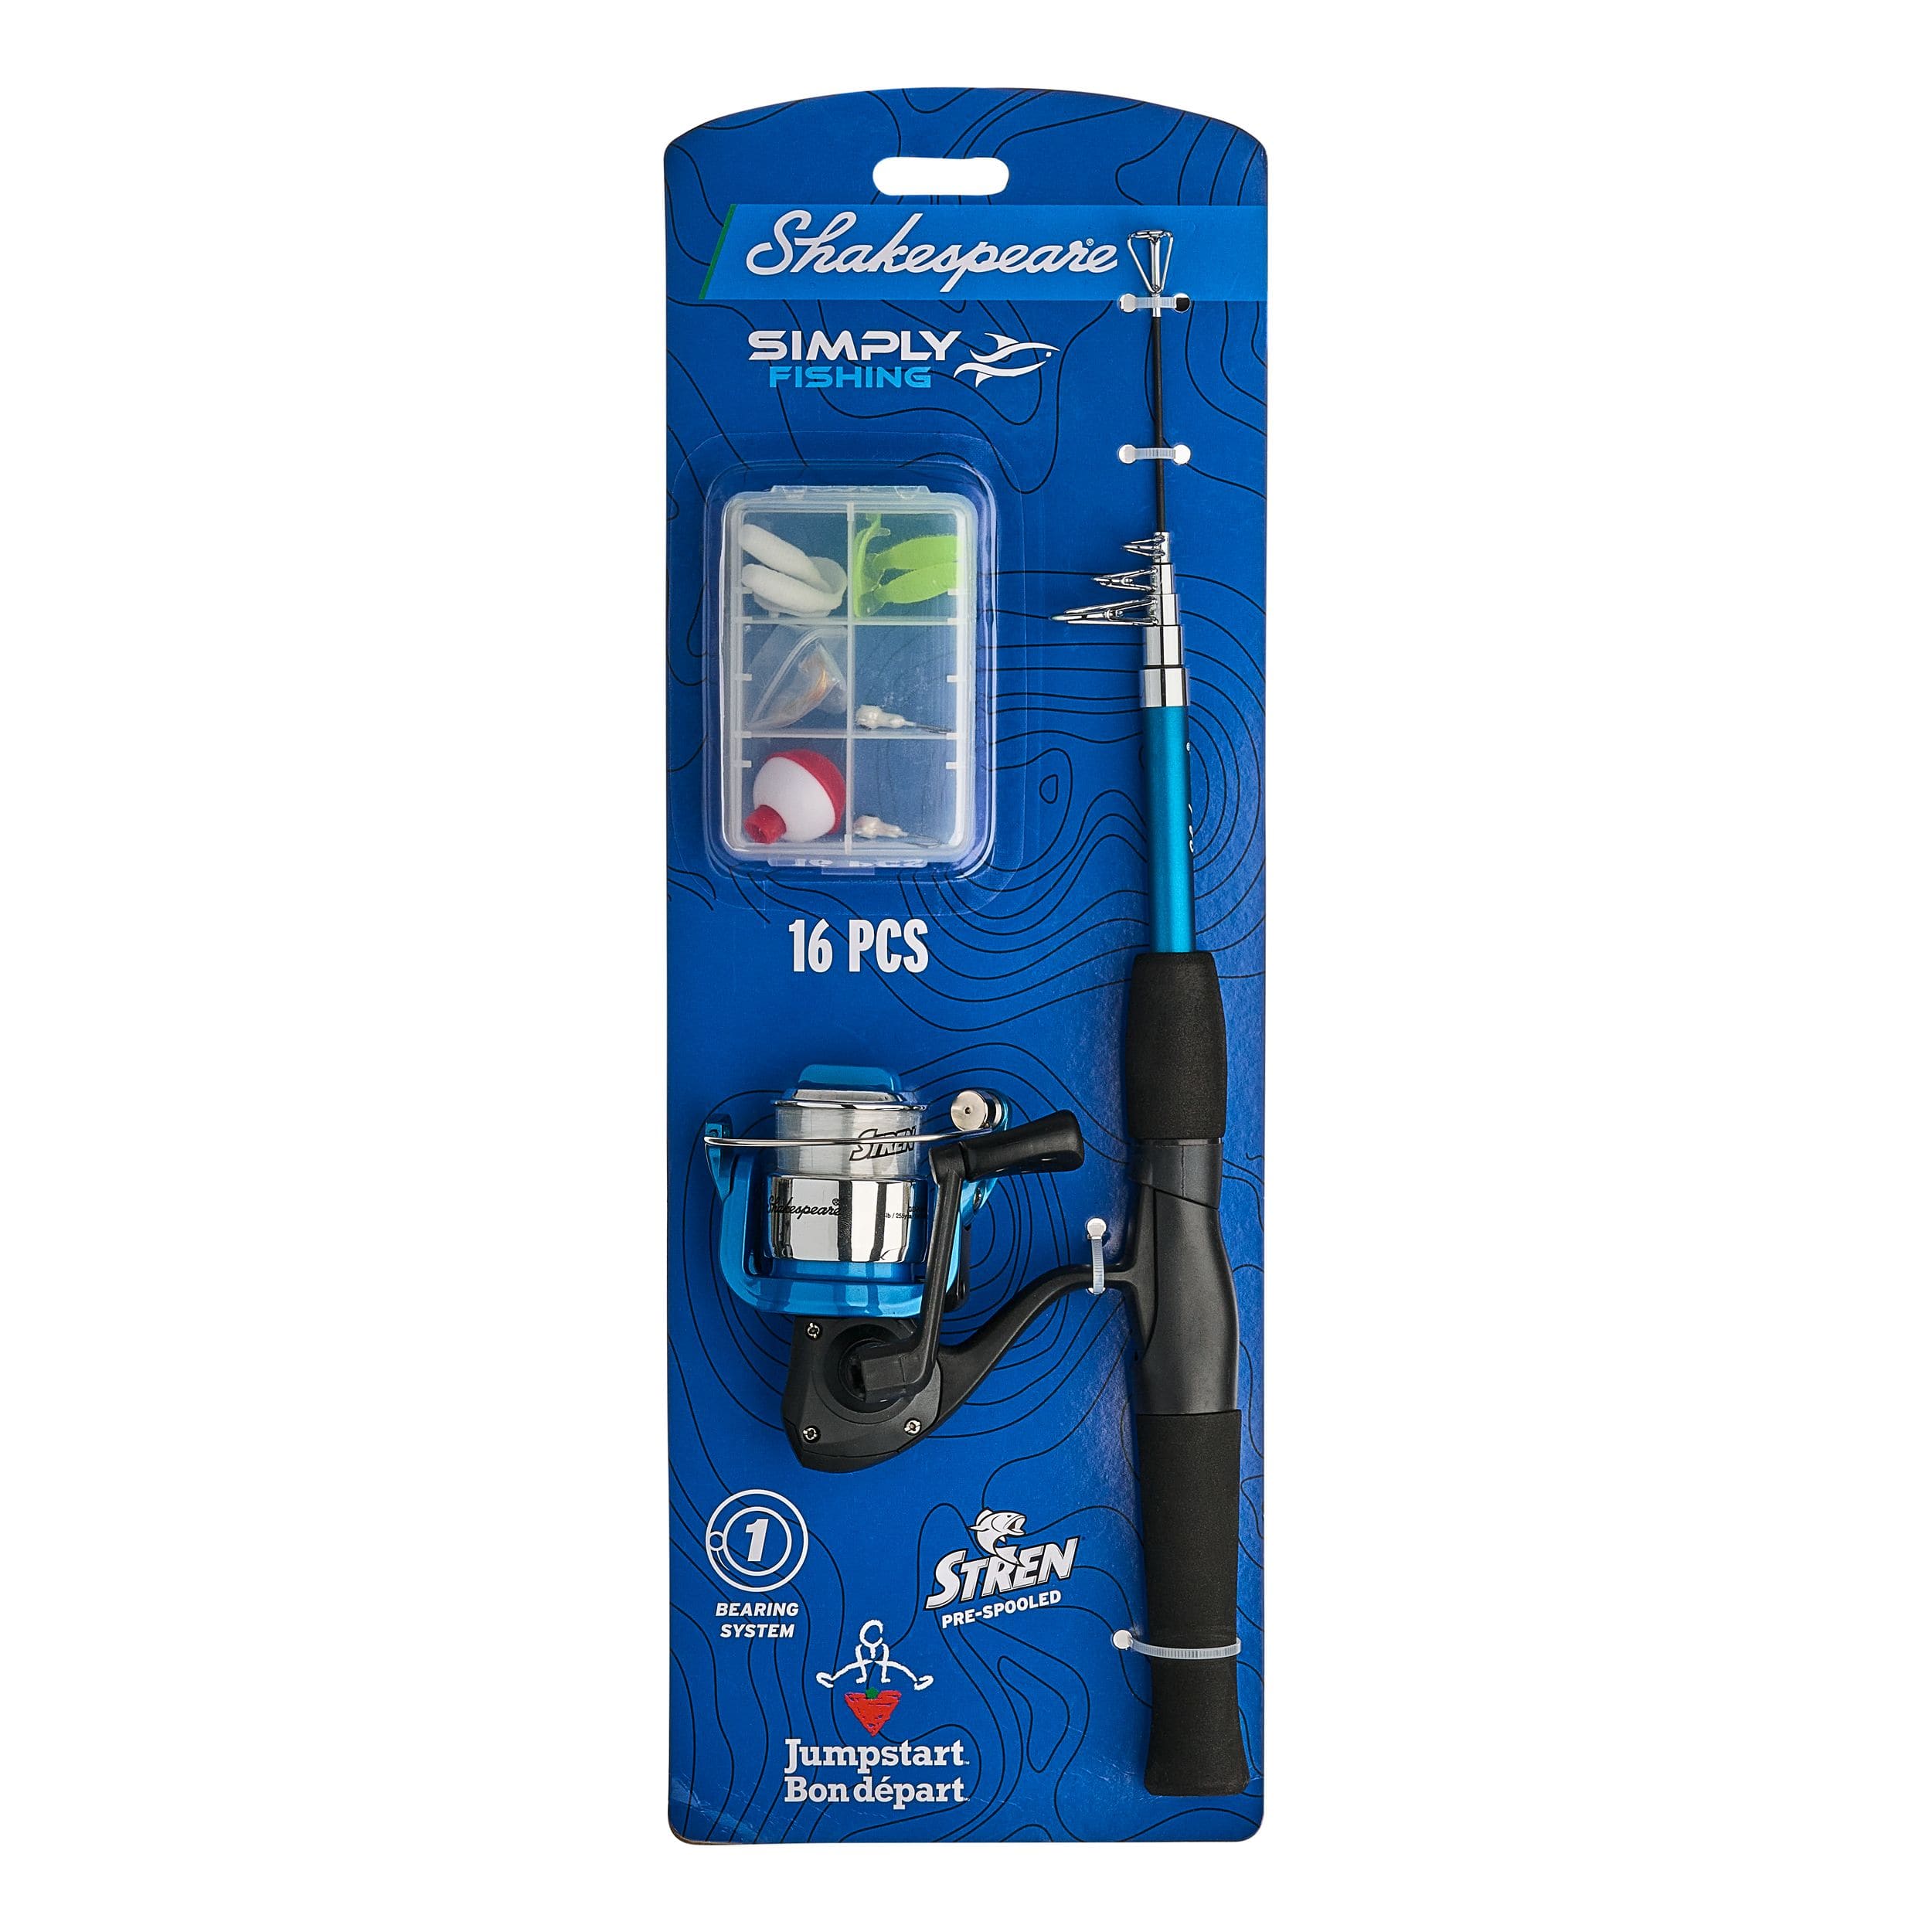 Shakespeare Simply Fishing Multi-Species Spinning Fishing Reel & Rod Combo,  4-ft 6-in, Medium